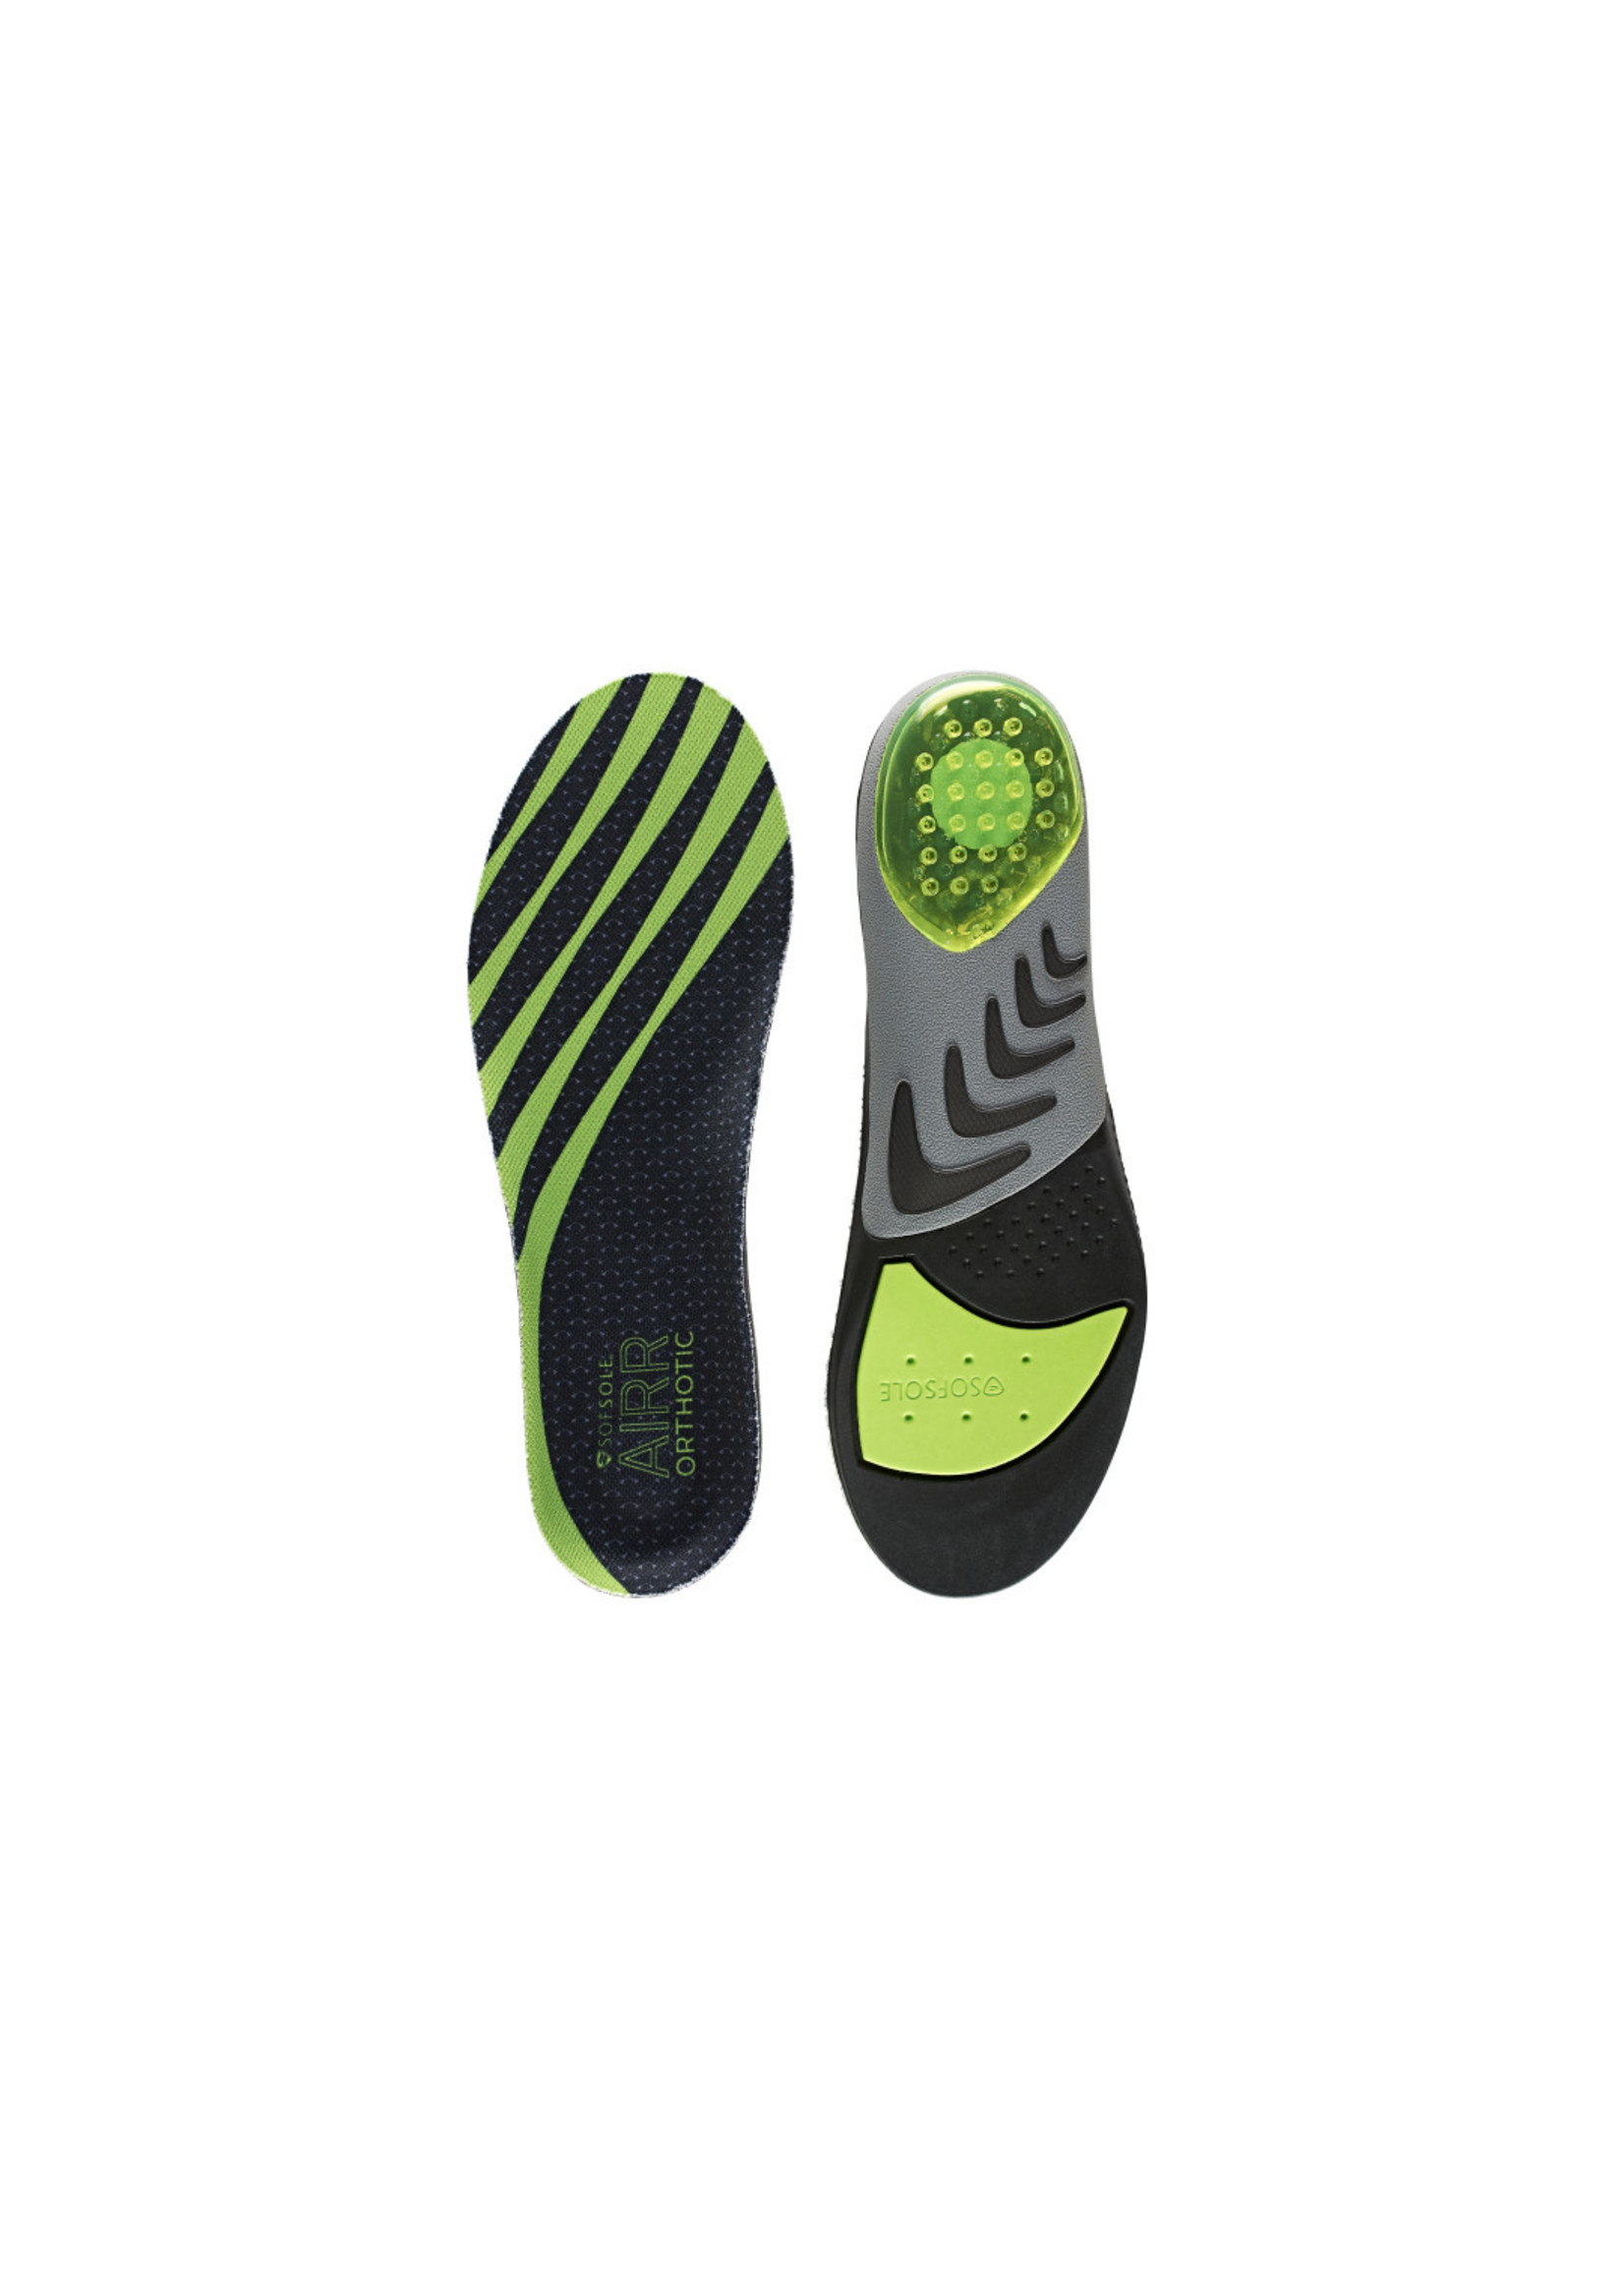 Sofsole Sofsole Women's Airr Orthotic Insole